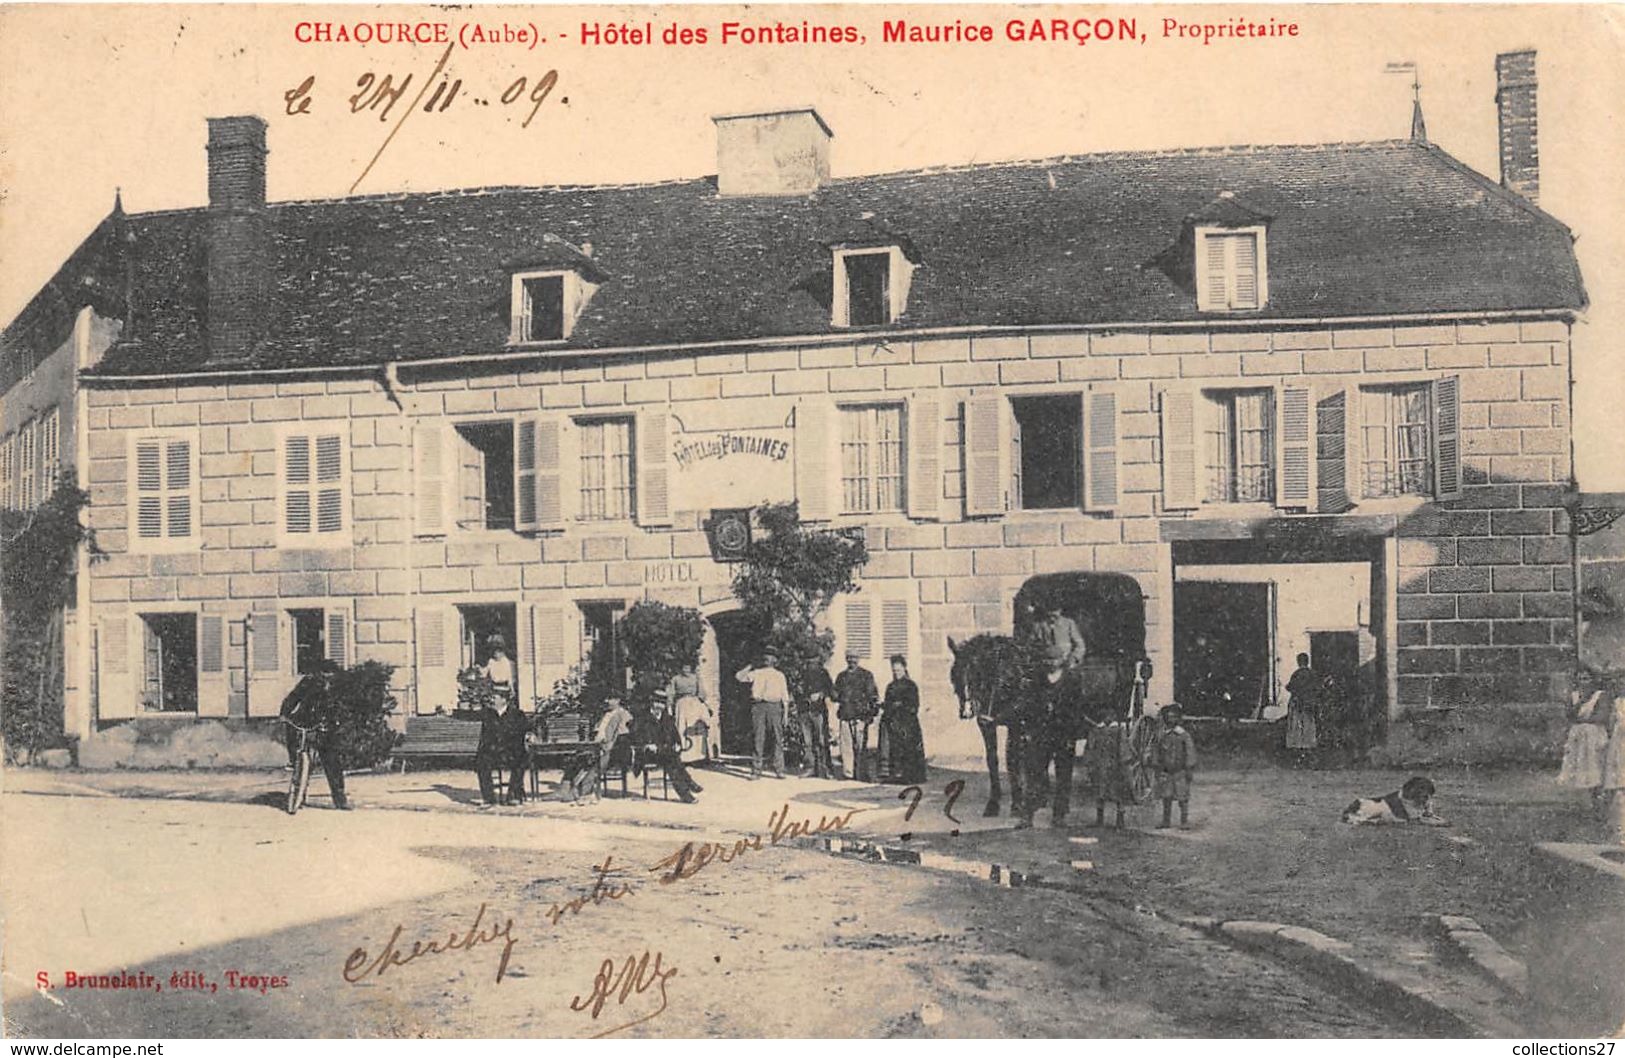 10-CHAOURCE- HÔTEL DES FONTAINES, MAURICE GARCON PROPRIETAIRE - Chaource